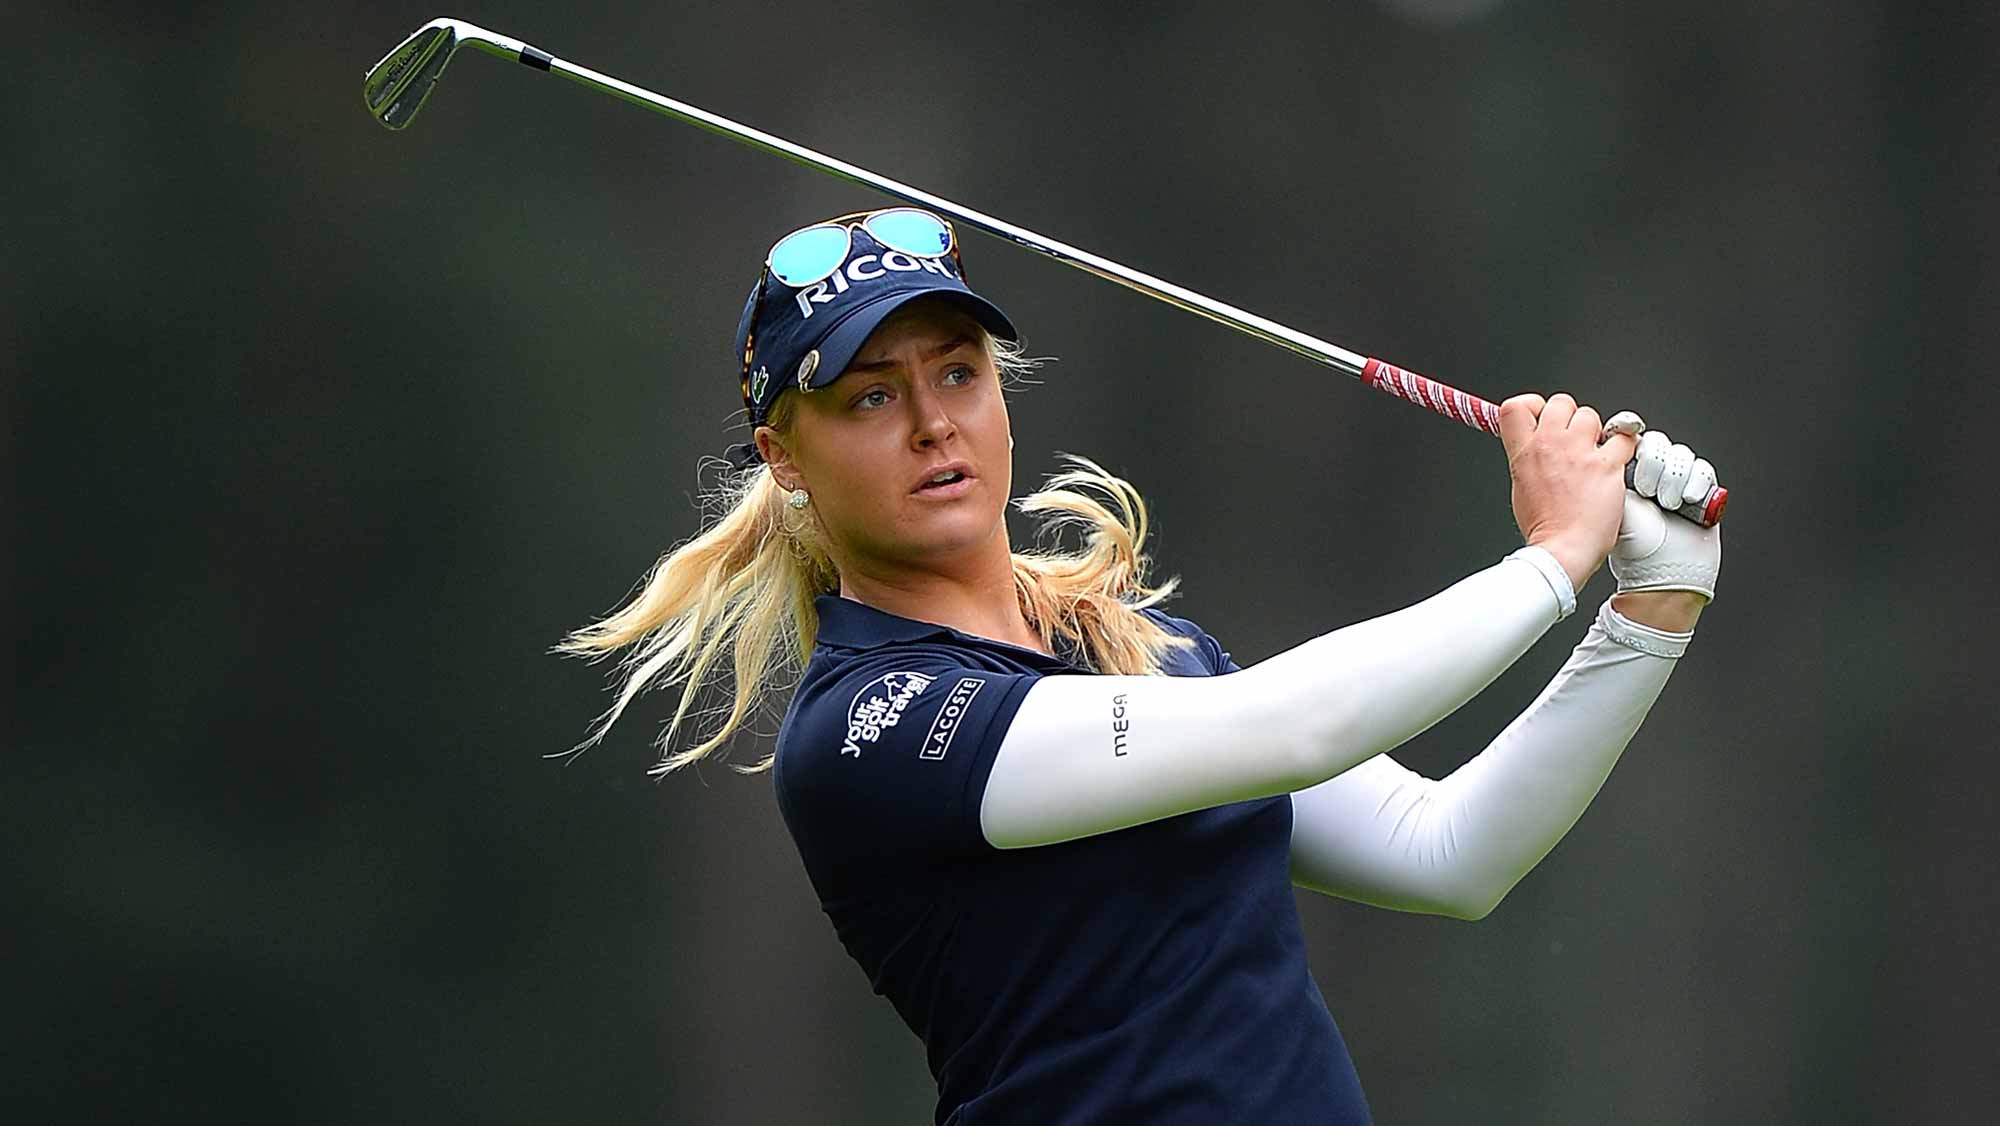 Charley Hull of England hits her second shot on the 3rd hole during the second round of the Ricoh Women's British Open at Woburn Golf Club